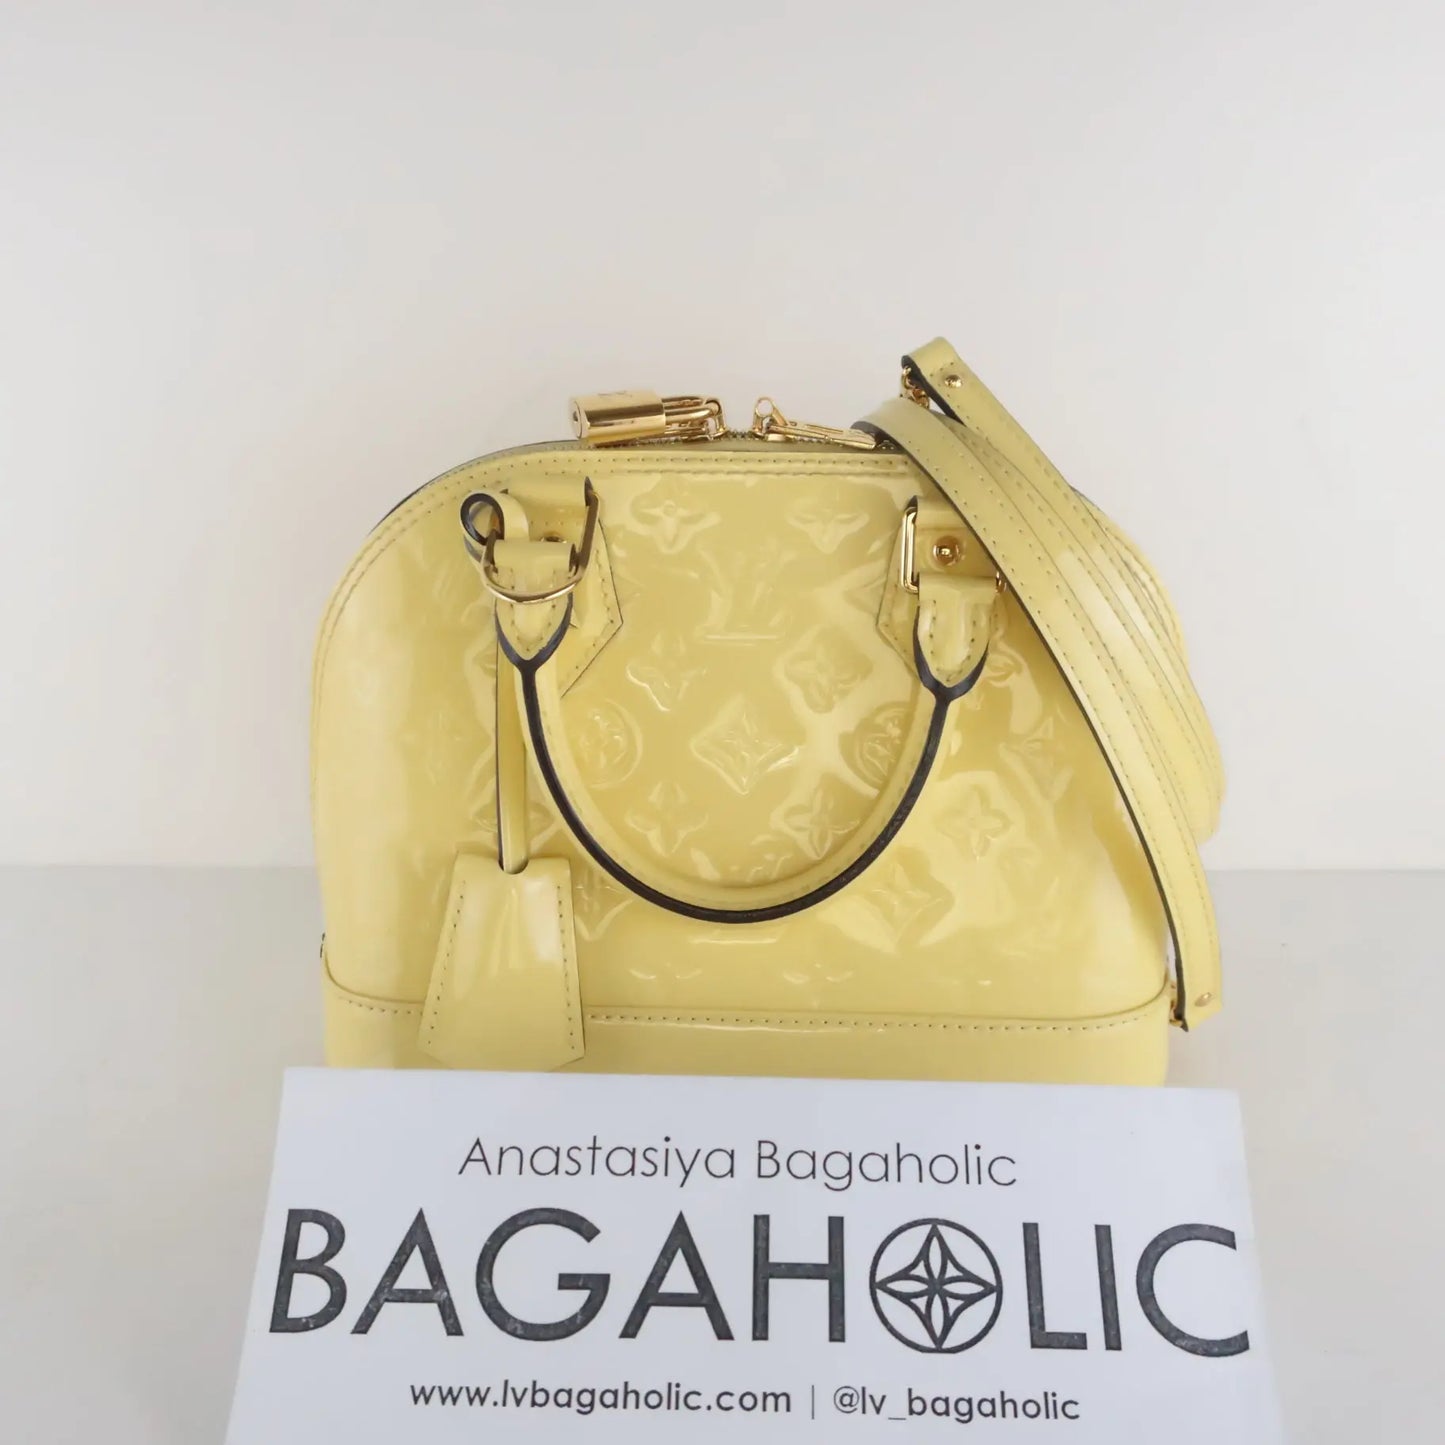 Louis Vuitton - Authenticated Spring Street Handbag - Patent Leather Yellow for Women, Good Condition